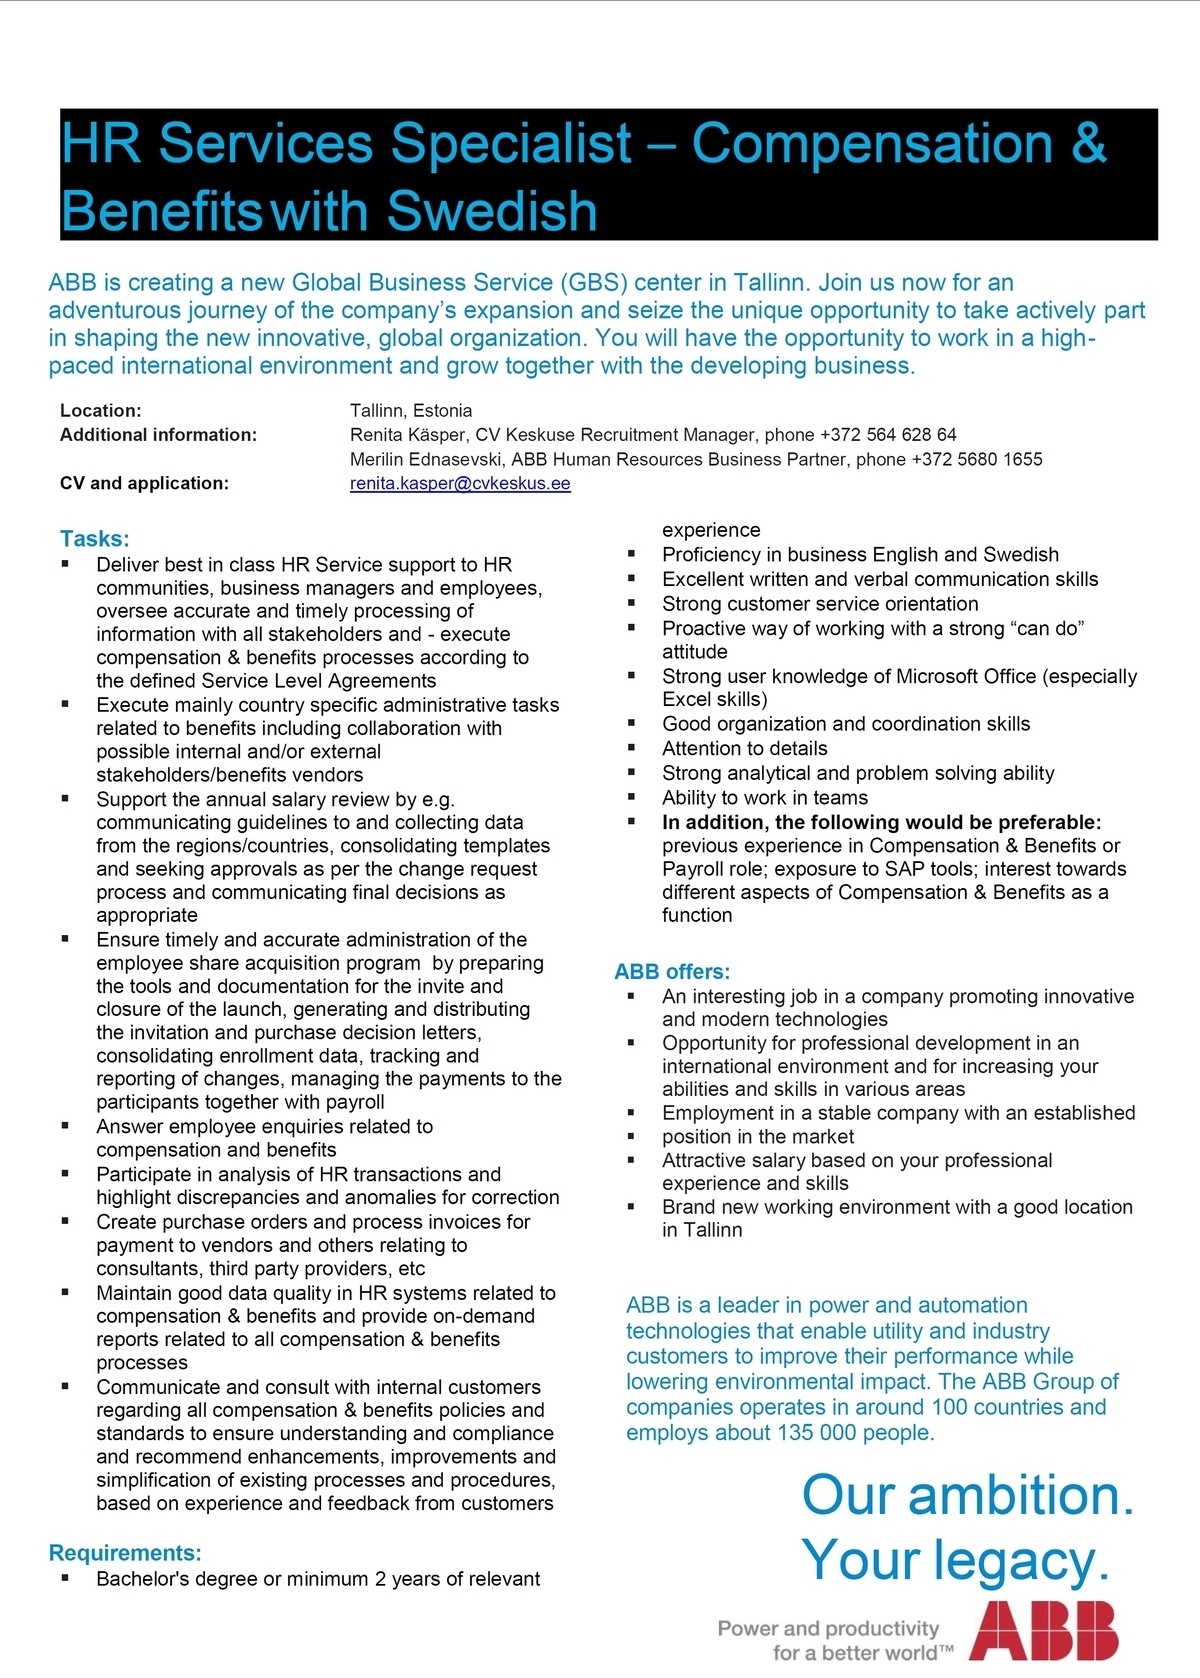 CV KESKUS OÜ ABB is looking for an HR Services Specialist – Compensation & Benefits with Swedish